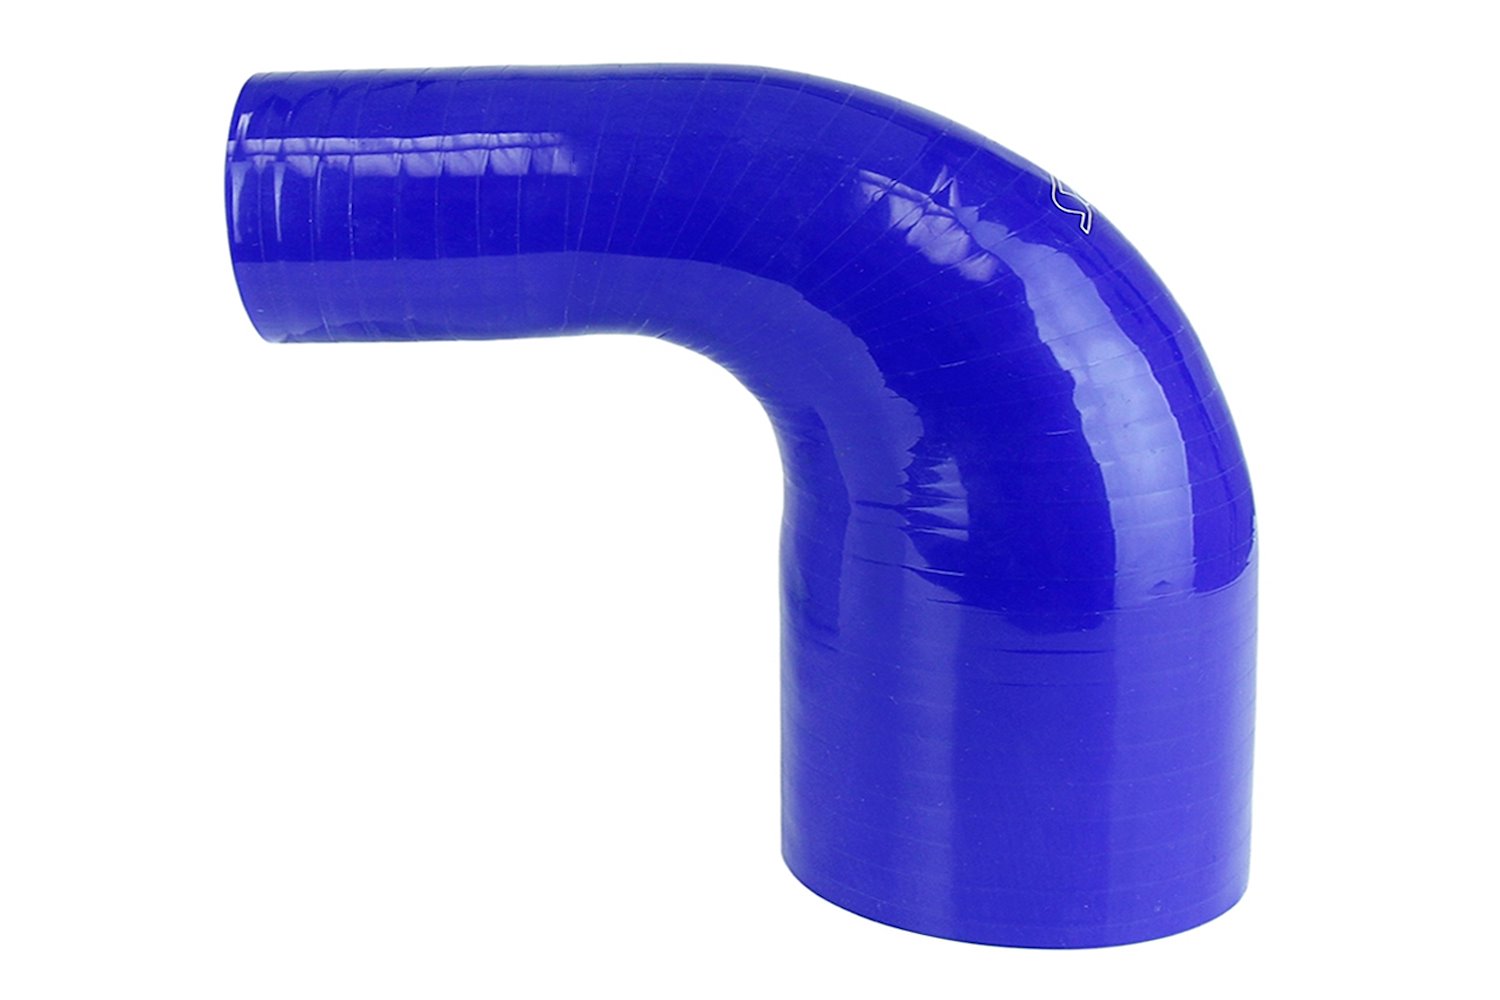 HTSER90-400-500-BLUE Silicone 90-Degree Elbow Hose, High-Temp 4-Ply Reinforced, 4 in. - 5 in. ID, Blue